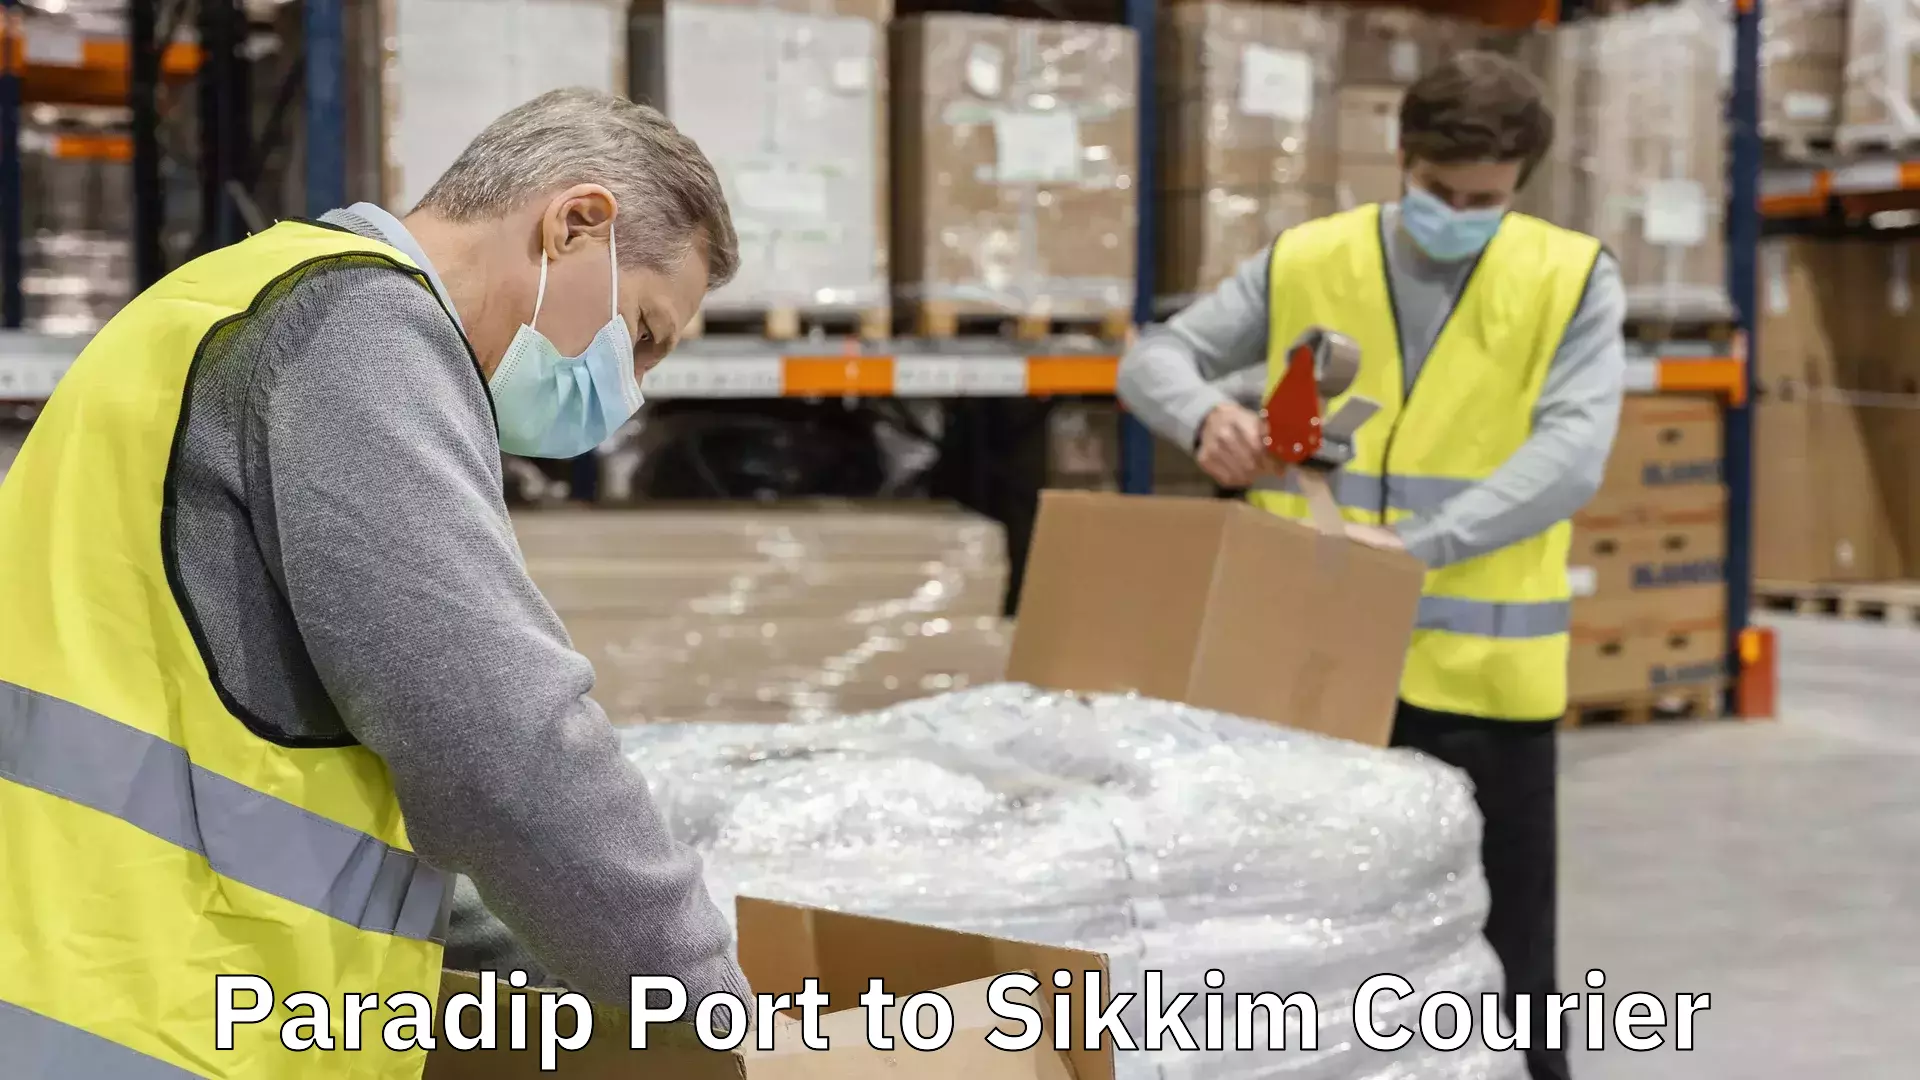 High-capacity parcel service Paradip Port to Sikkim